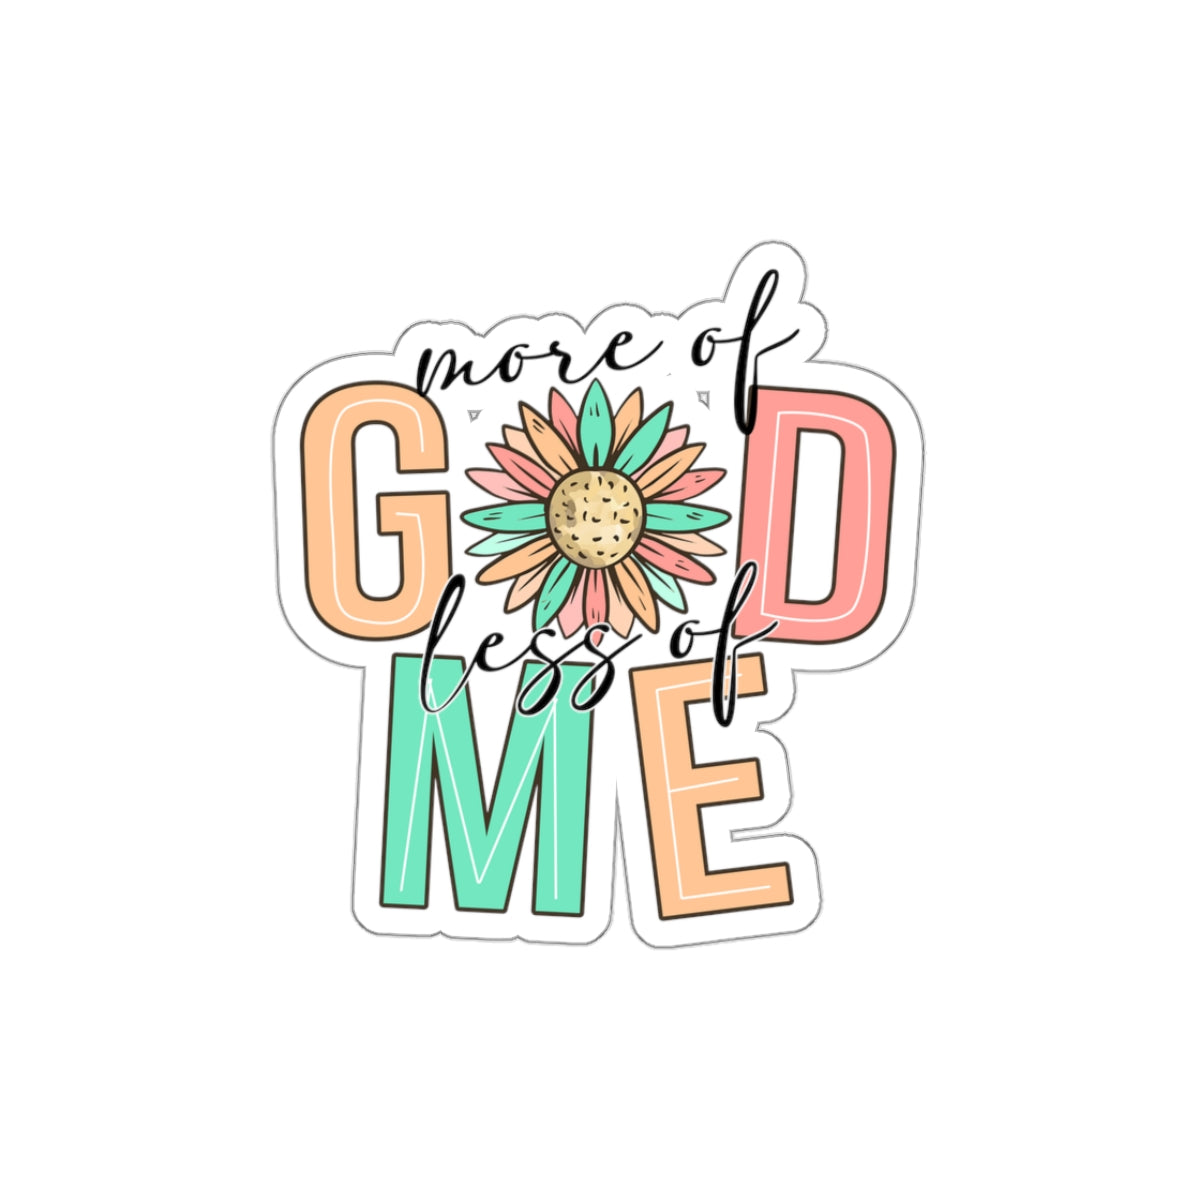 More Of God Less Of Me Kiss-Cut Stickers